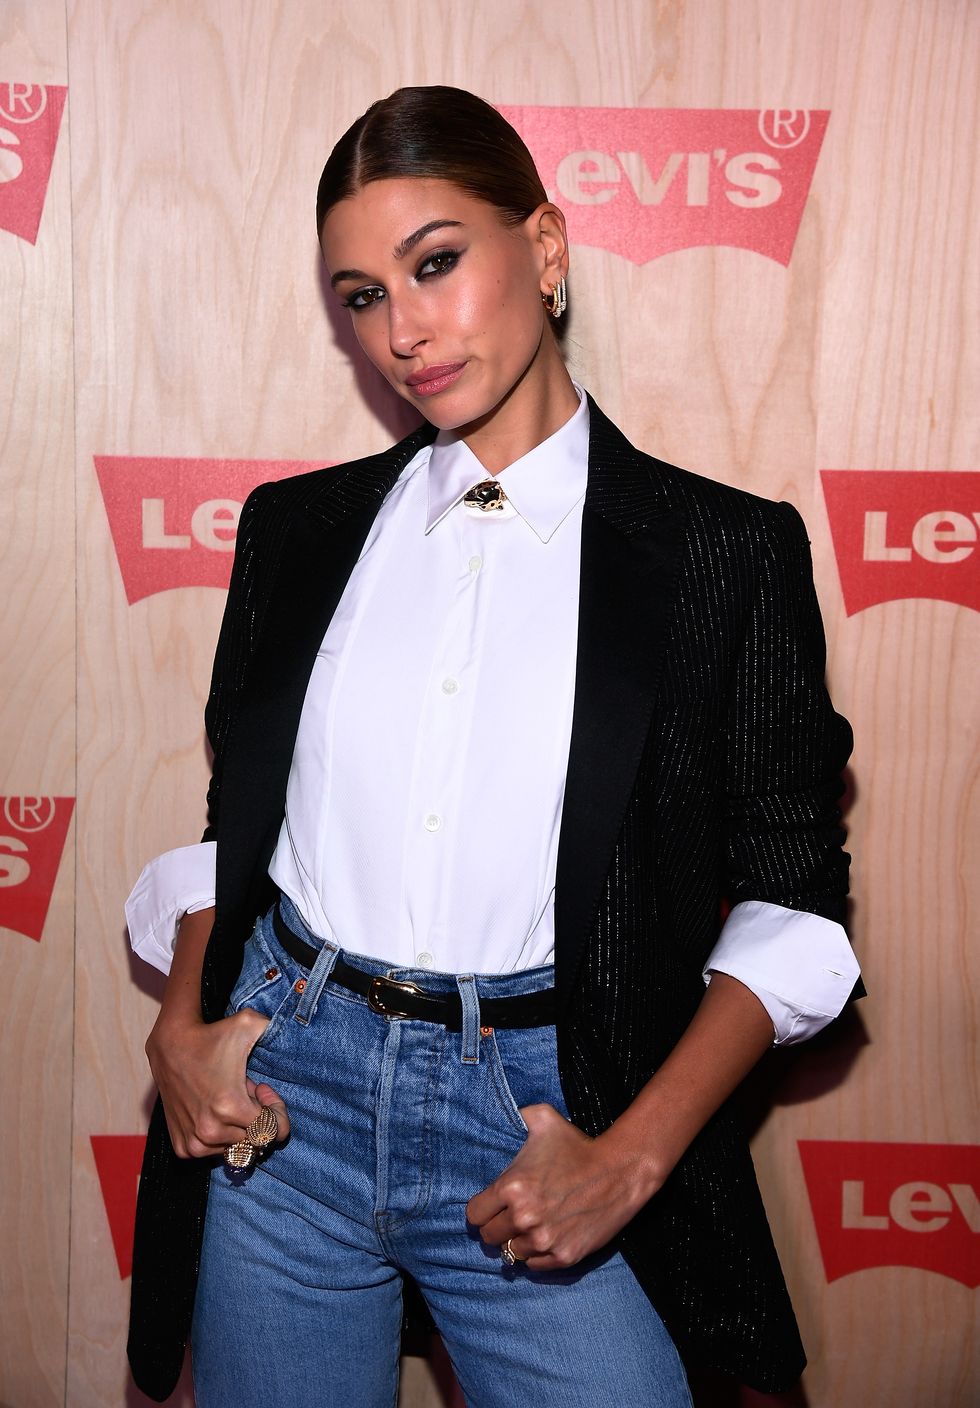 levi's times square store opening